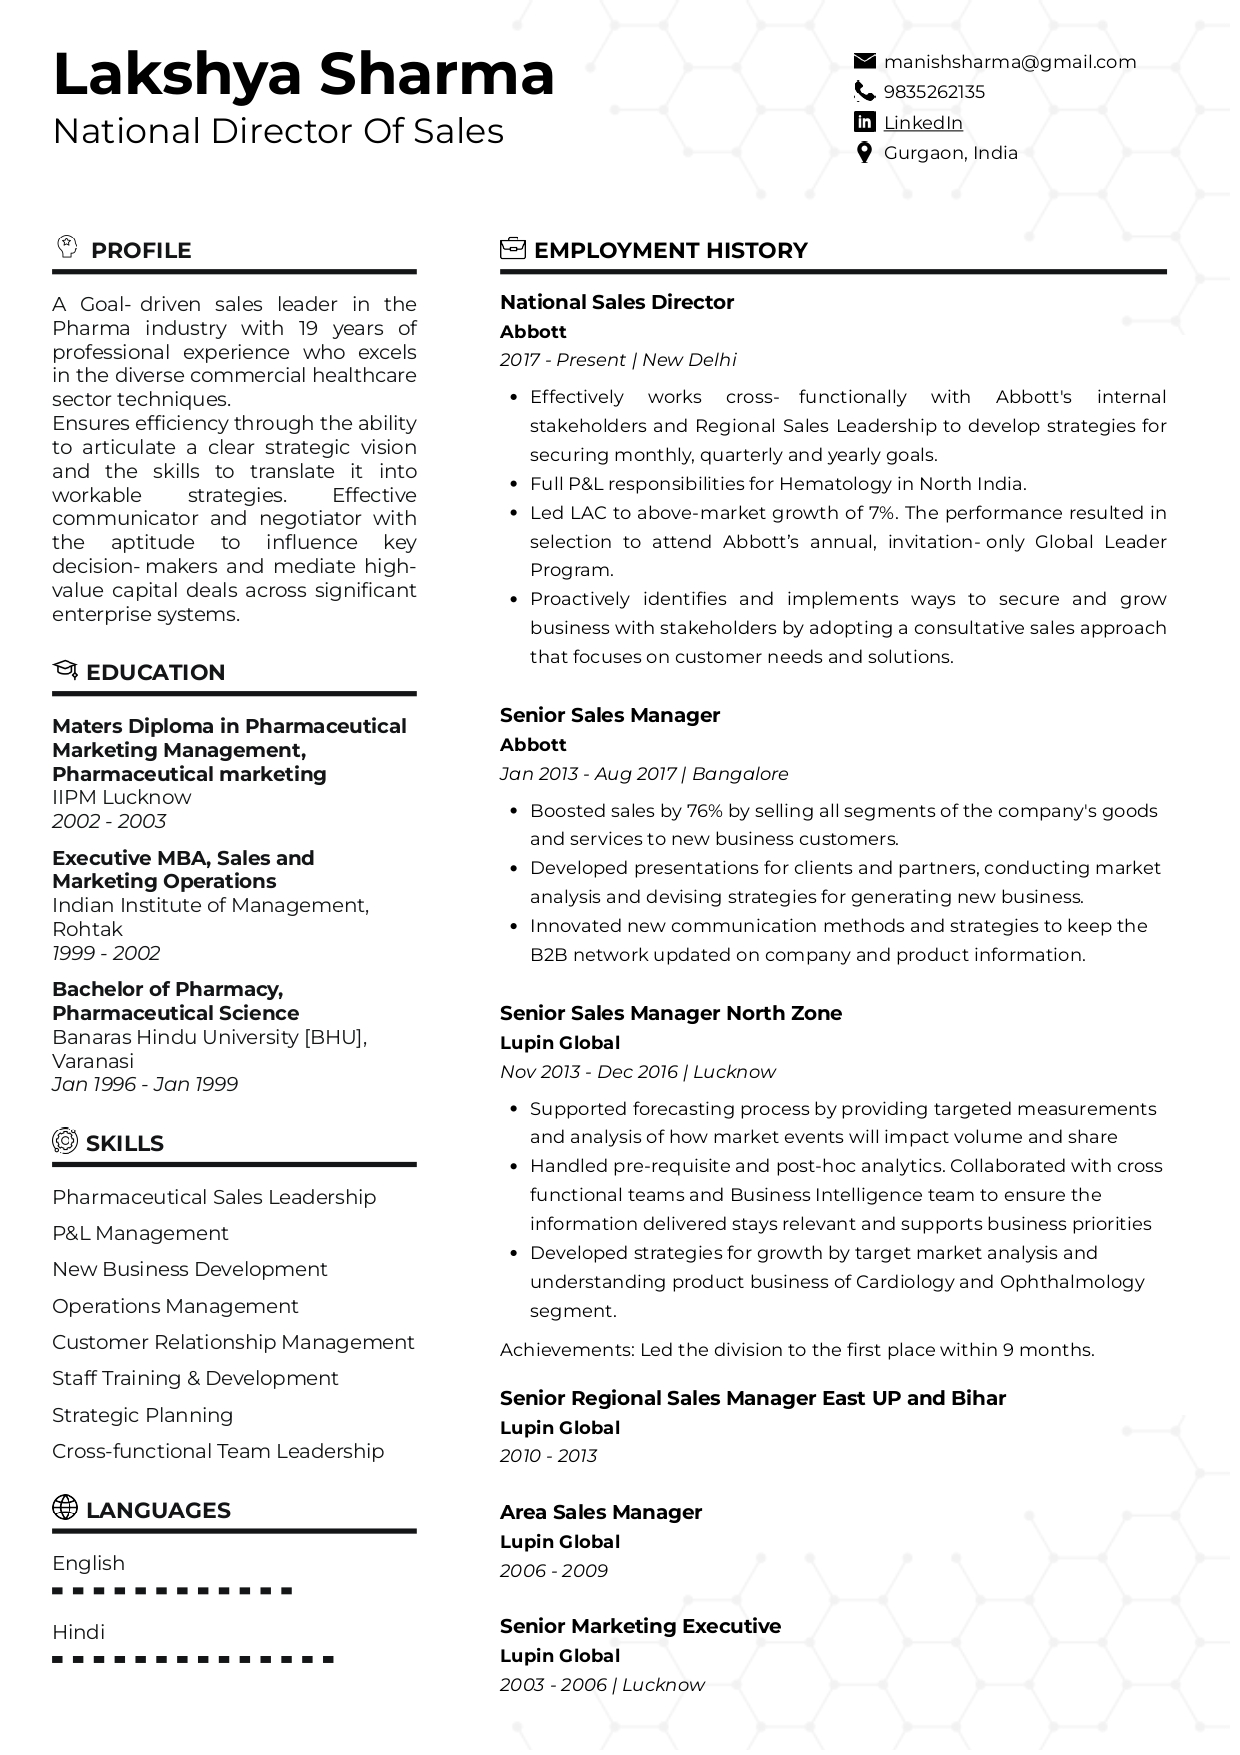 Resume of National Director of Sales